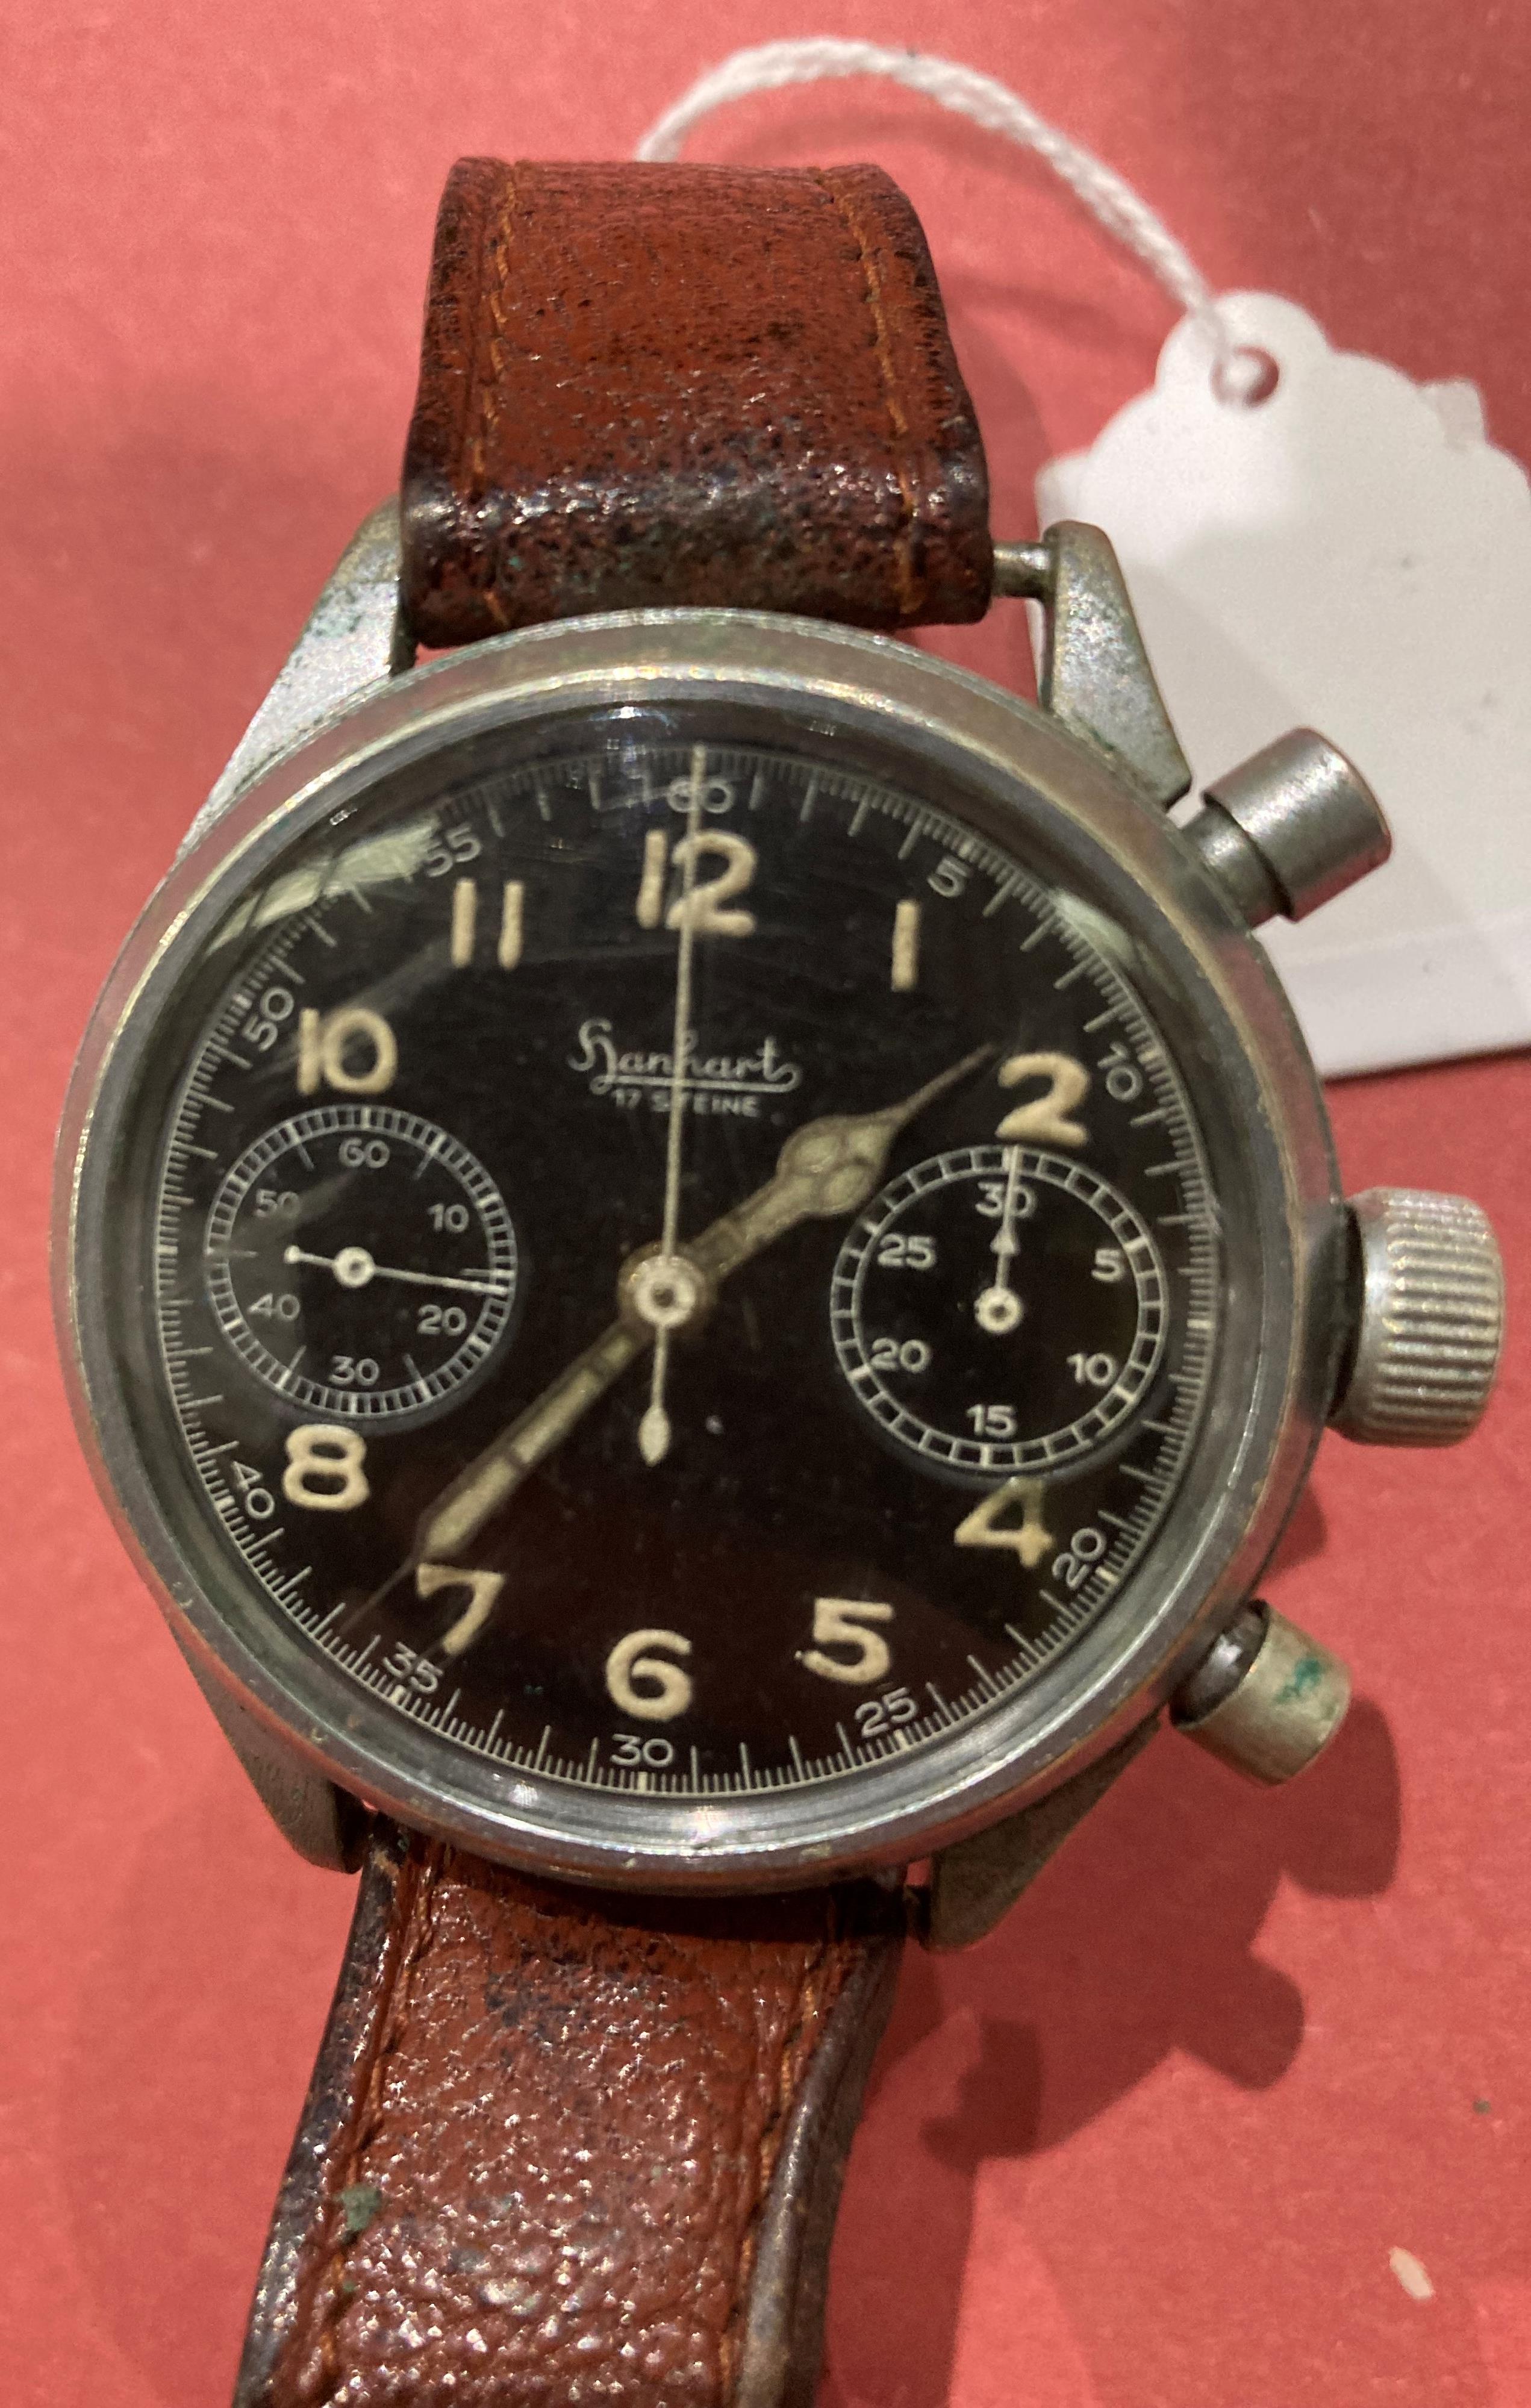 A Hanharts World War II Luftwaffe pilots chronograph with black face and brown leather strap - Image 6 of 10